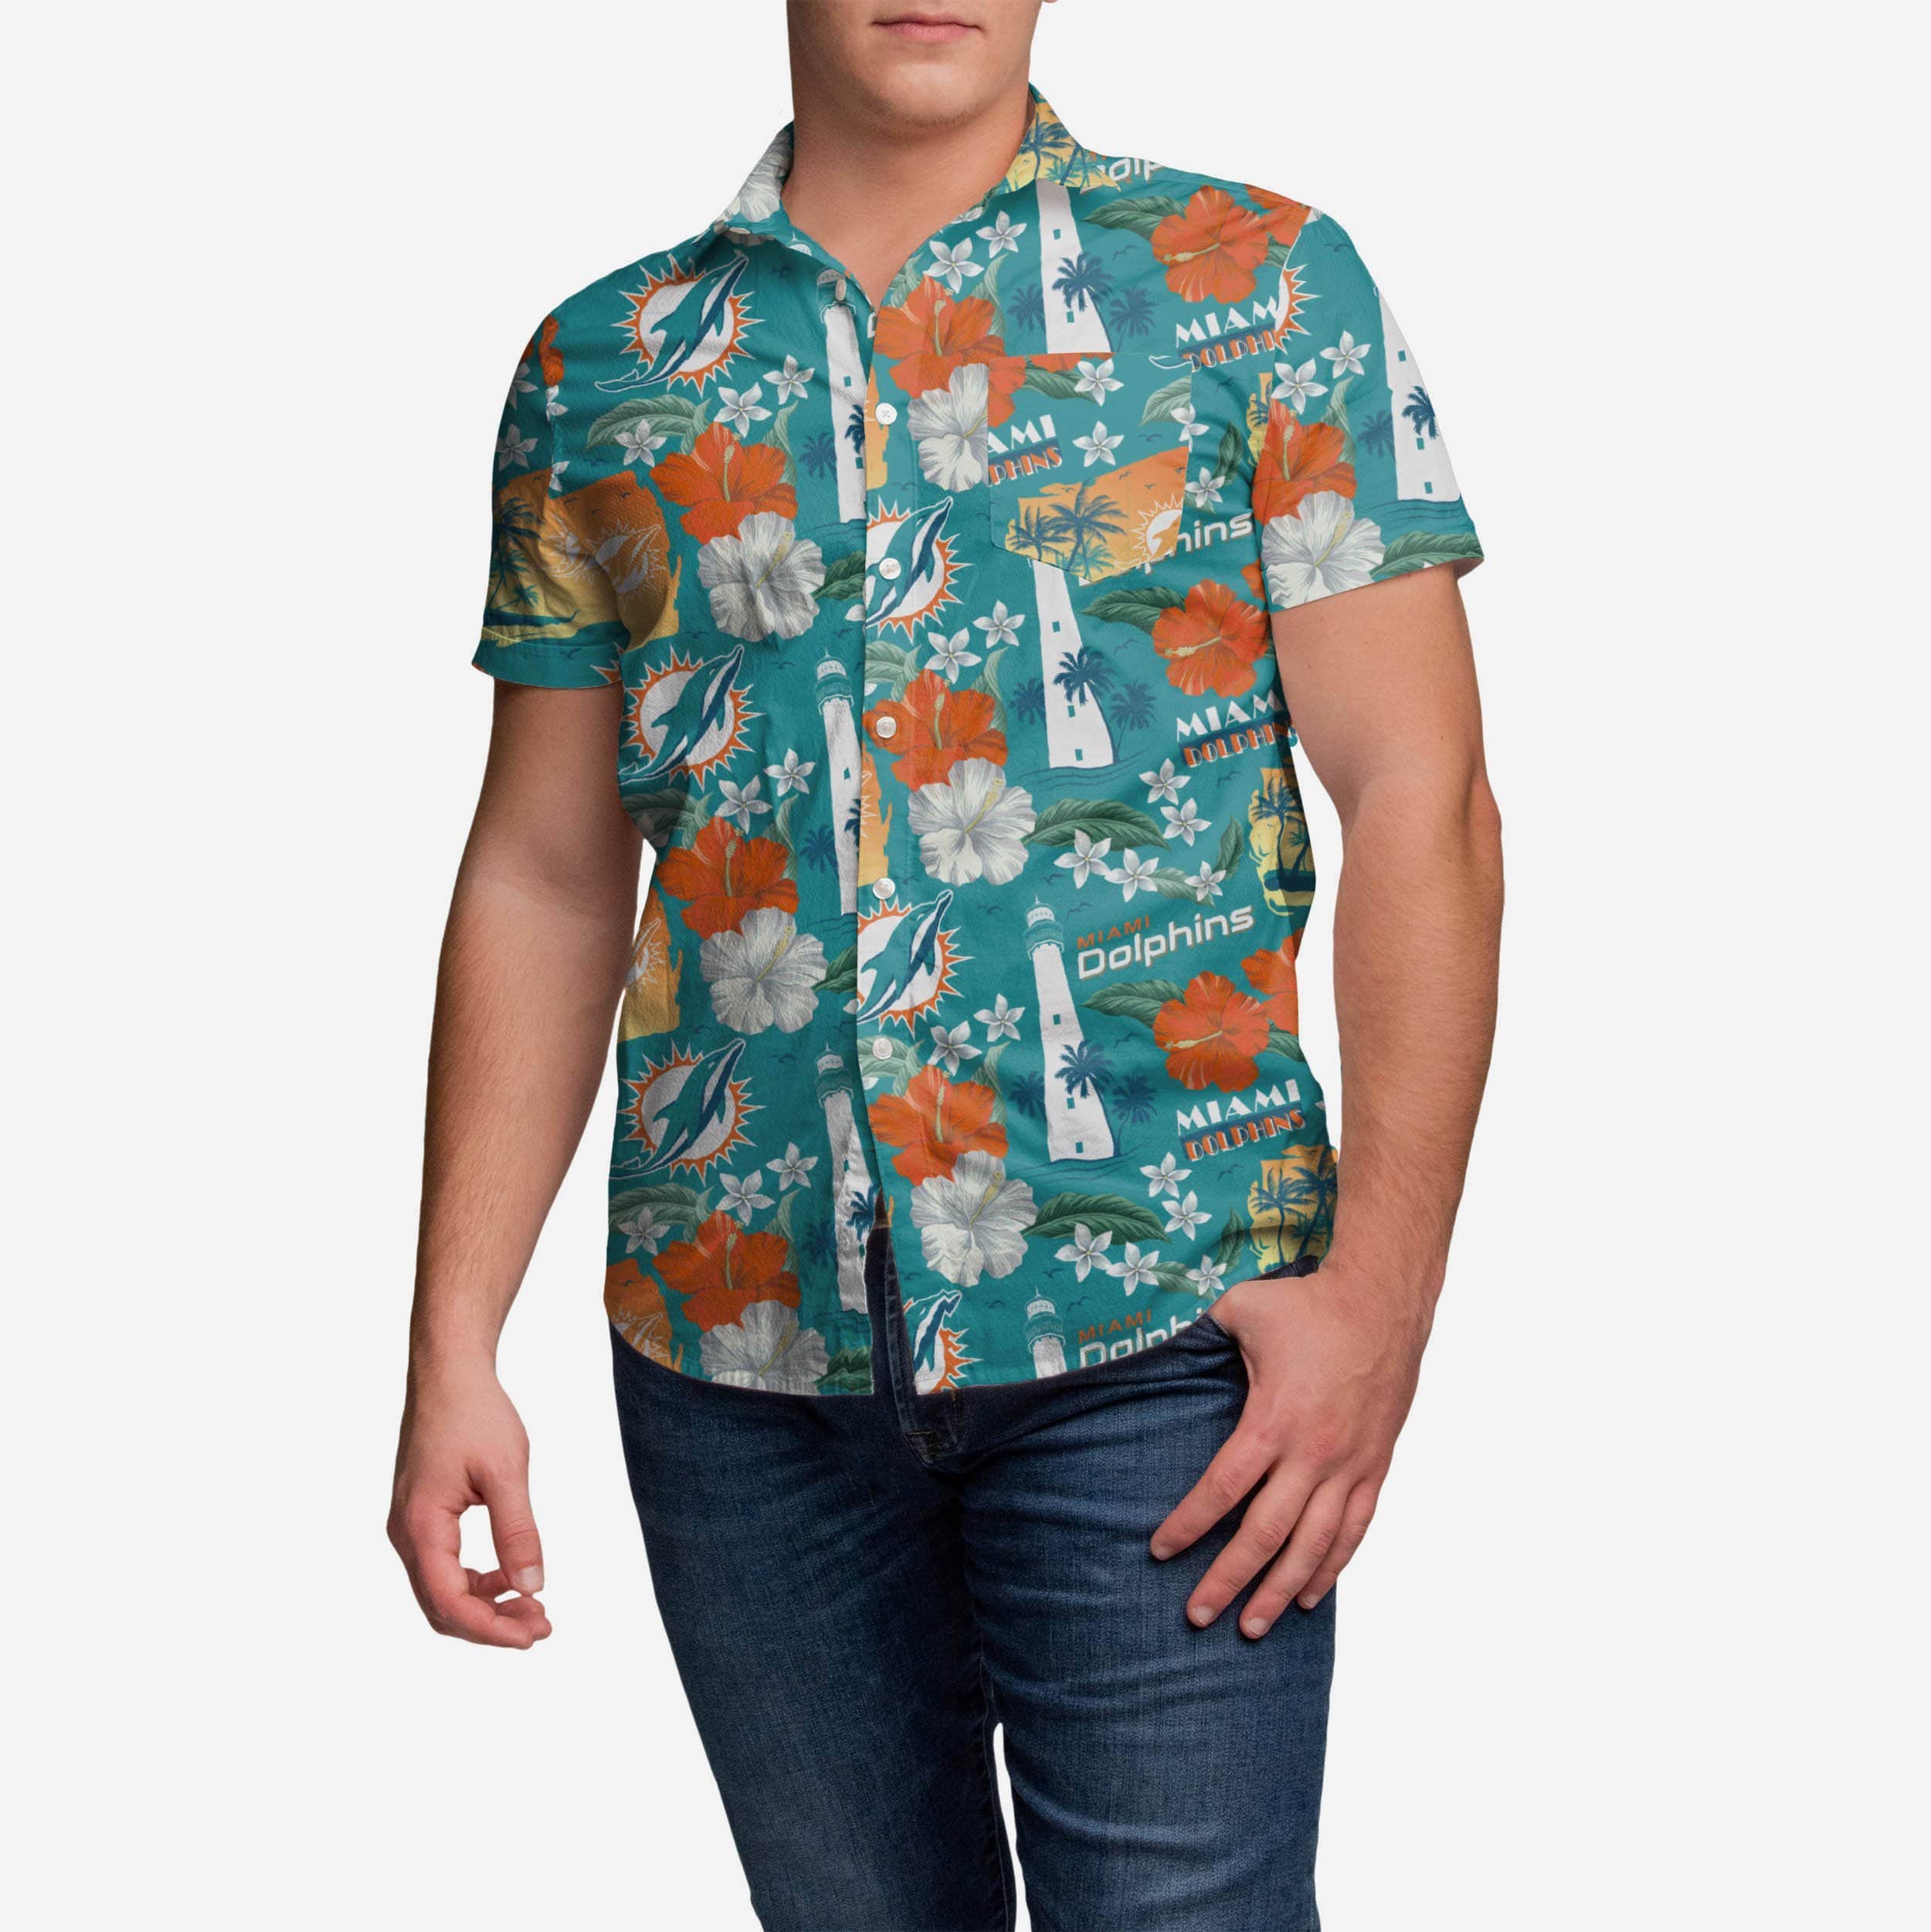 Miami Dolphins Shop - Miami Dolphins City Style Button Up Shirt